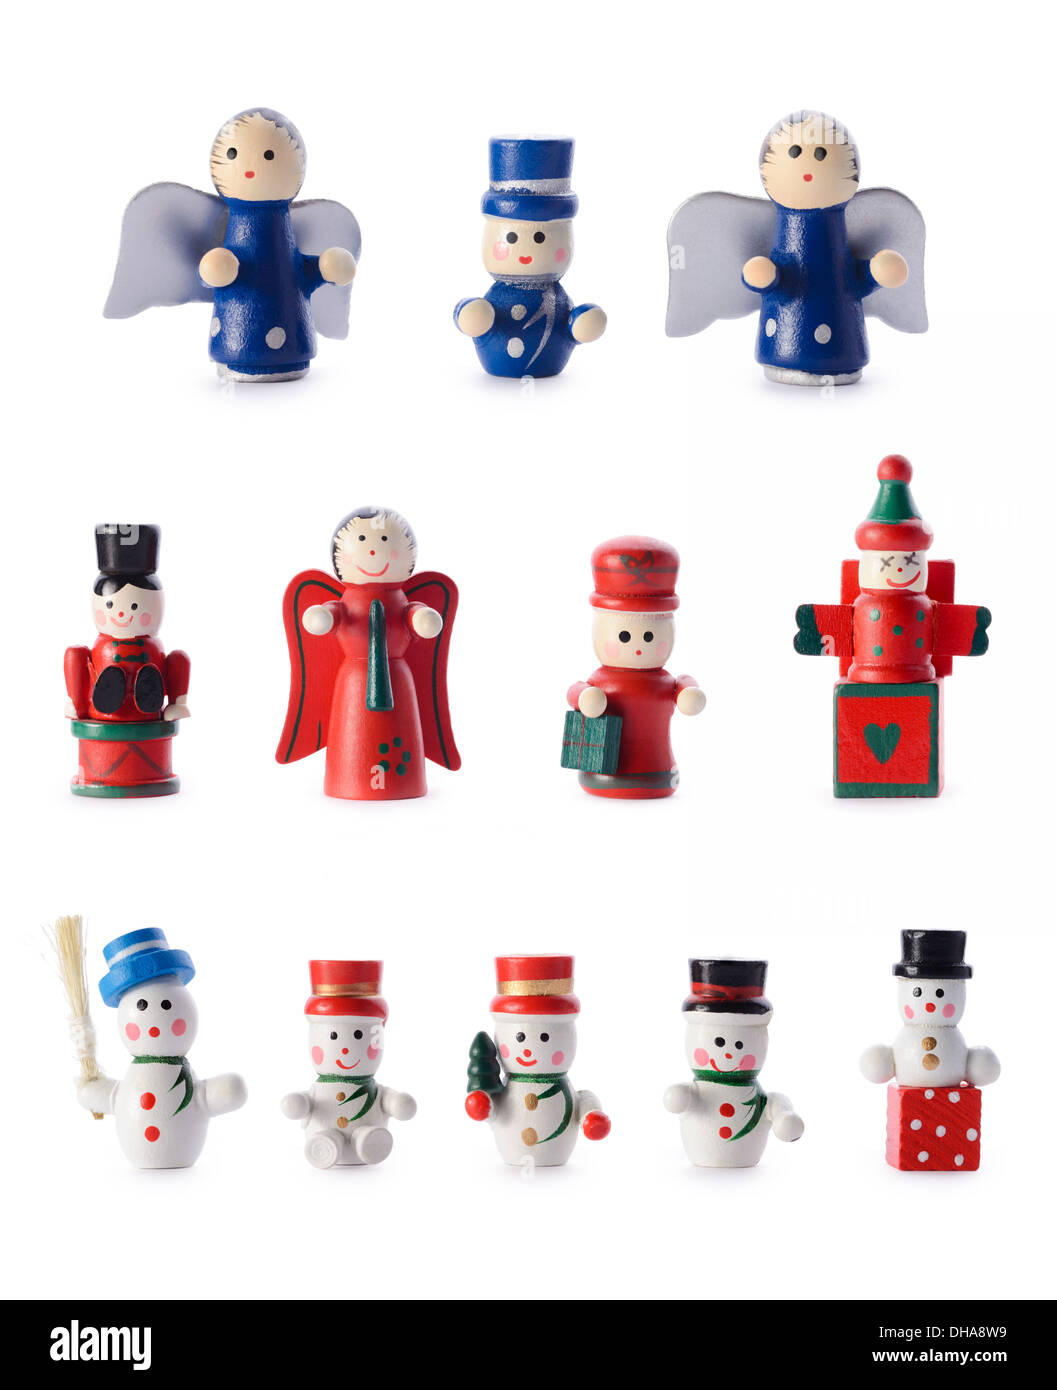 Christmas decorations: group of small retro-styled figurines, Christmas tree decorations, isolated on white background Stock Photo